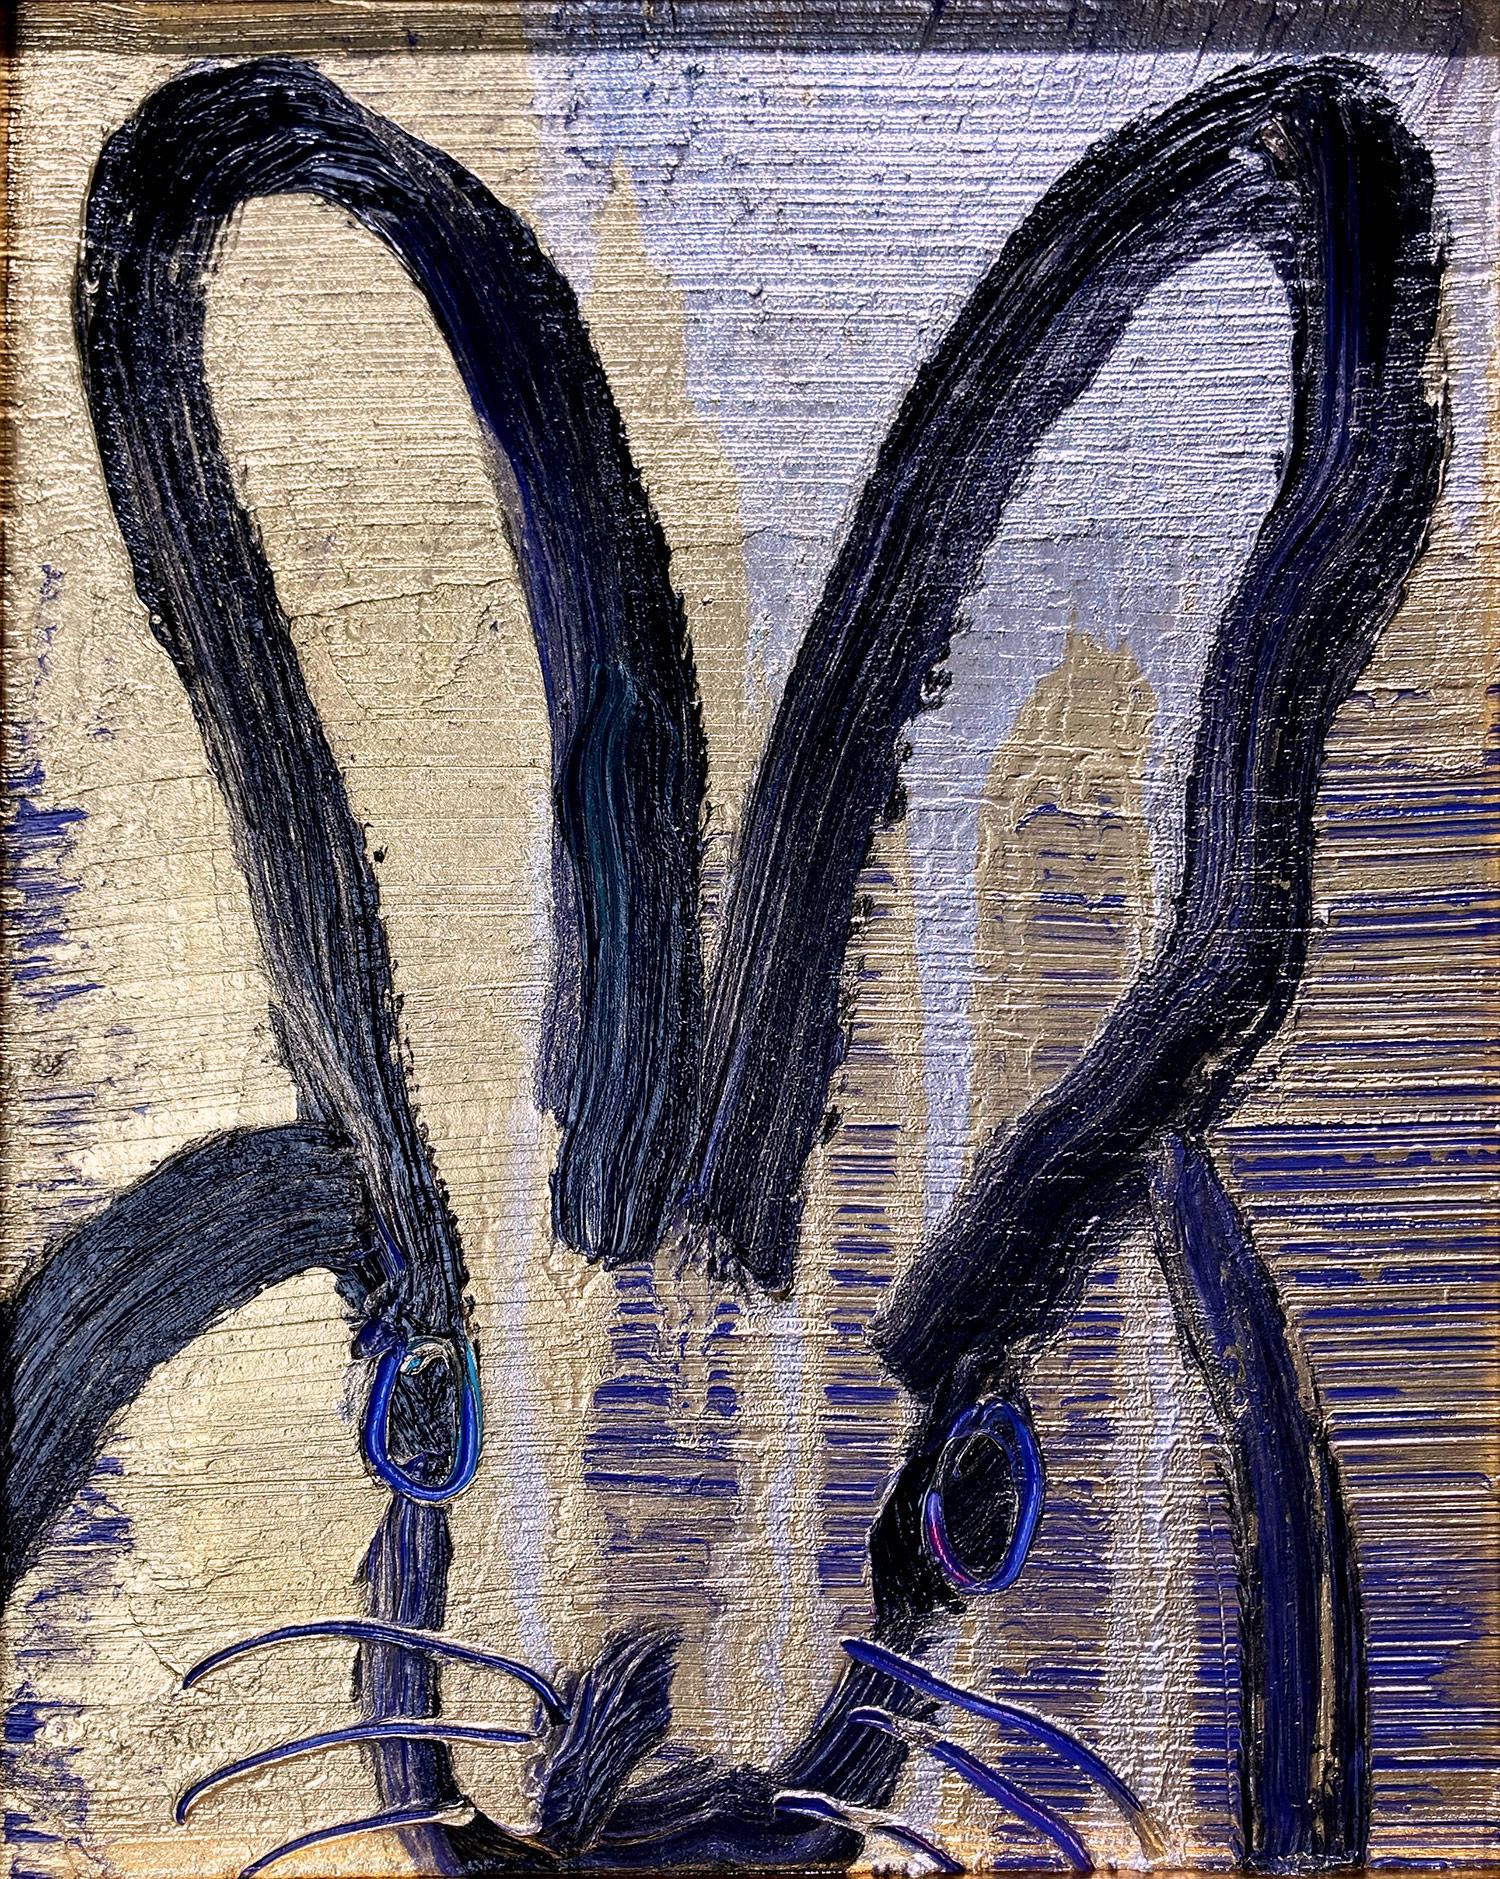 A wonderful composition of one of Slonem's most iconic subjects, Bunnies. This piece depicts a gestural figure of a black bunny on a Navy Blue, silver and Gold background with thick use of colorful paint. It is housed in a wonderful gold tone